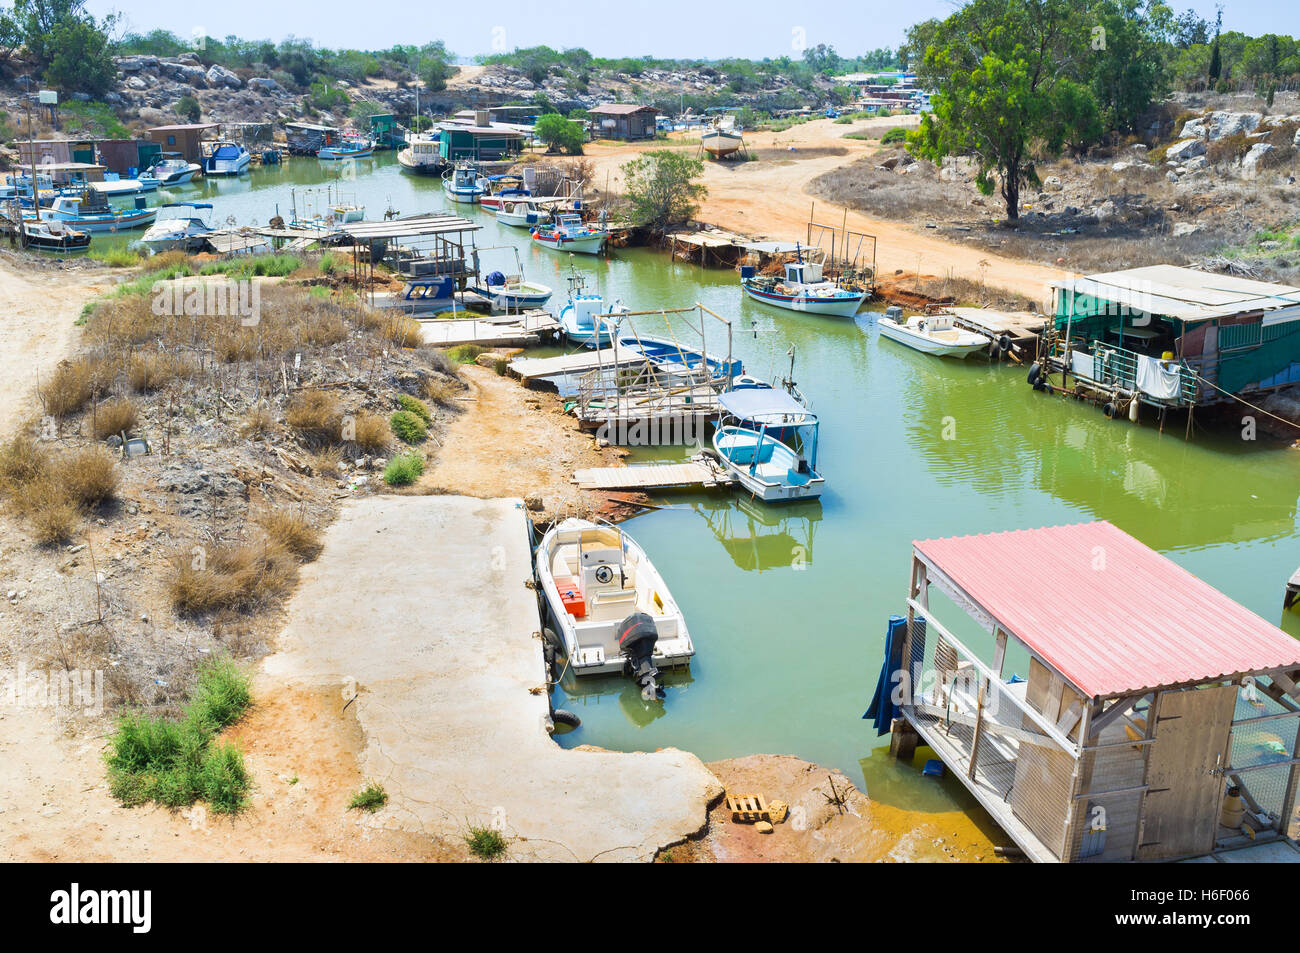 Many fishing boats moored on the banks of the narrow winding riverbed, Liopetri, Cyprus. Stock Photo